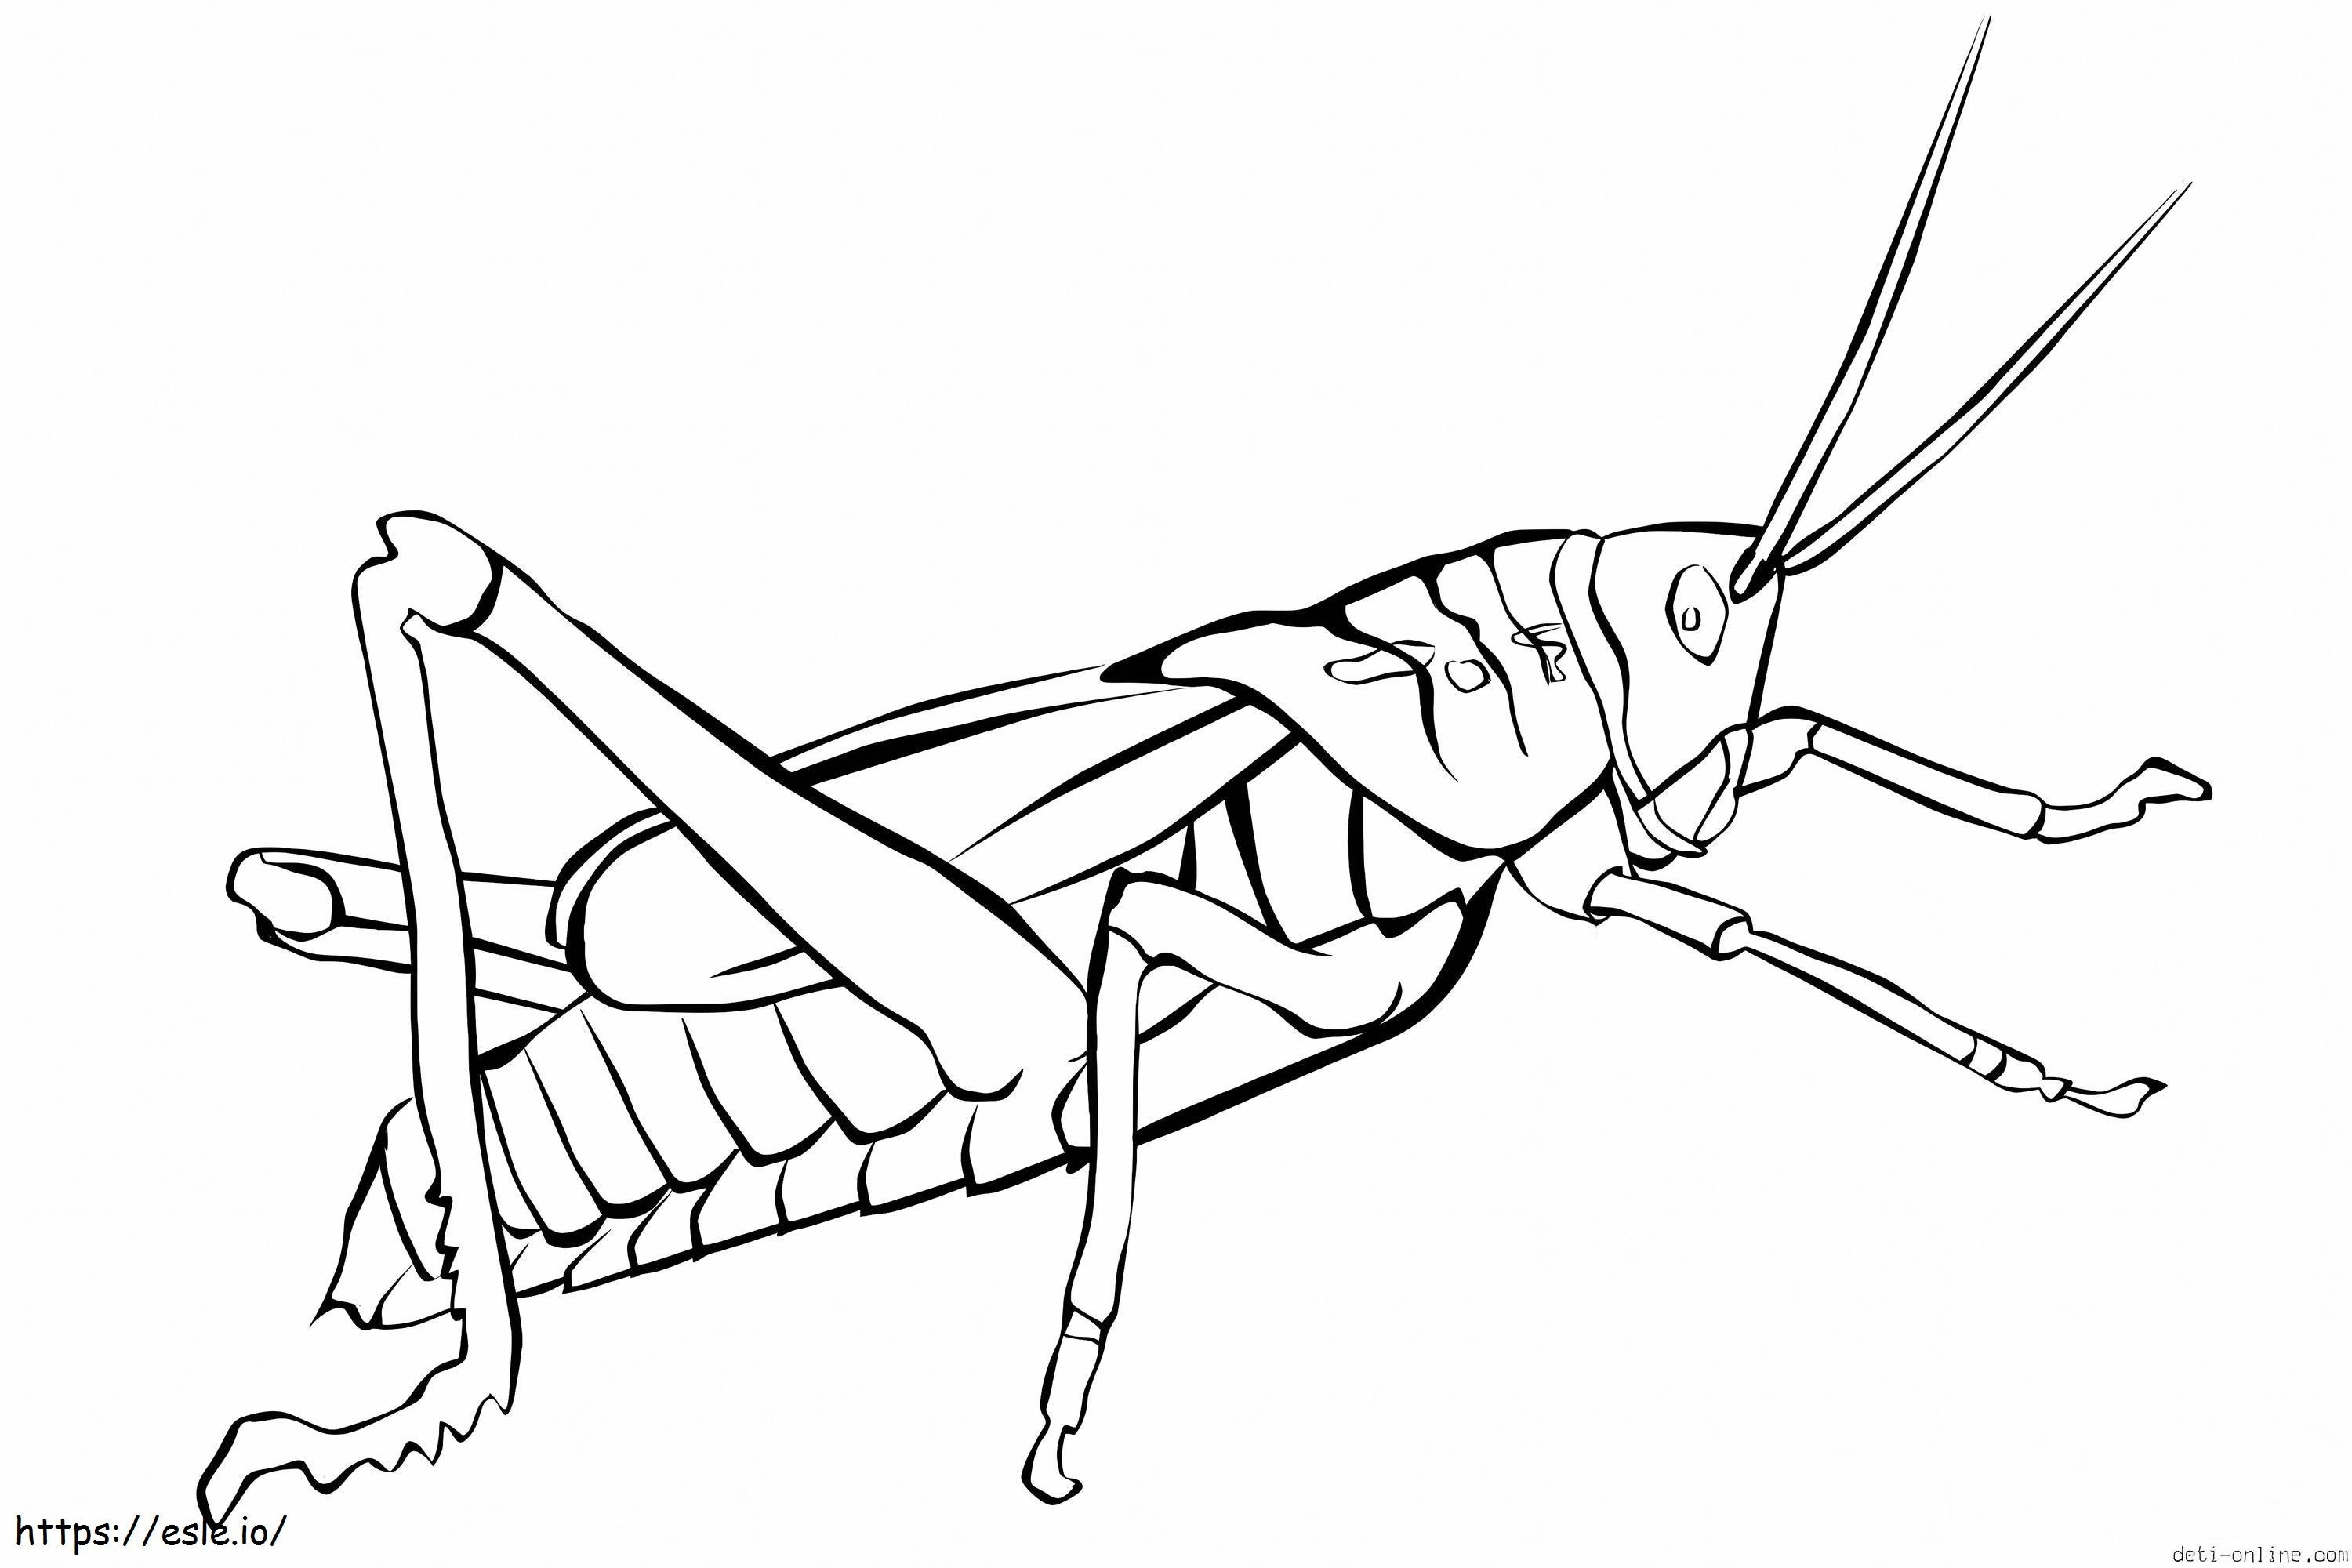 Good Grasshopper coloring page